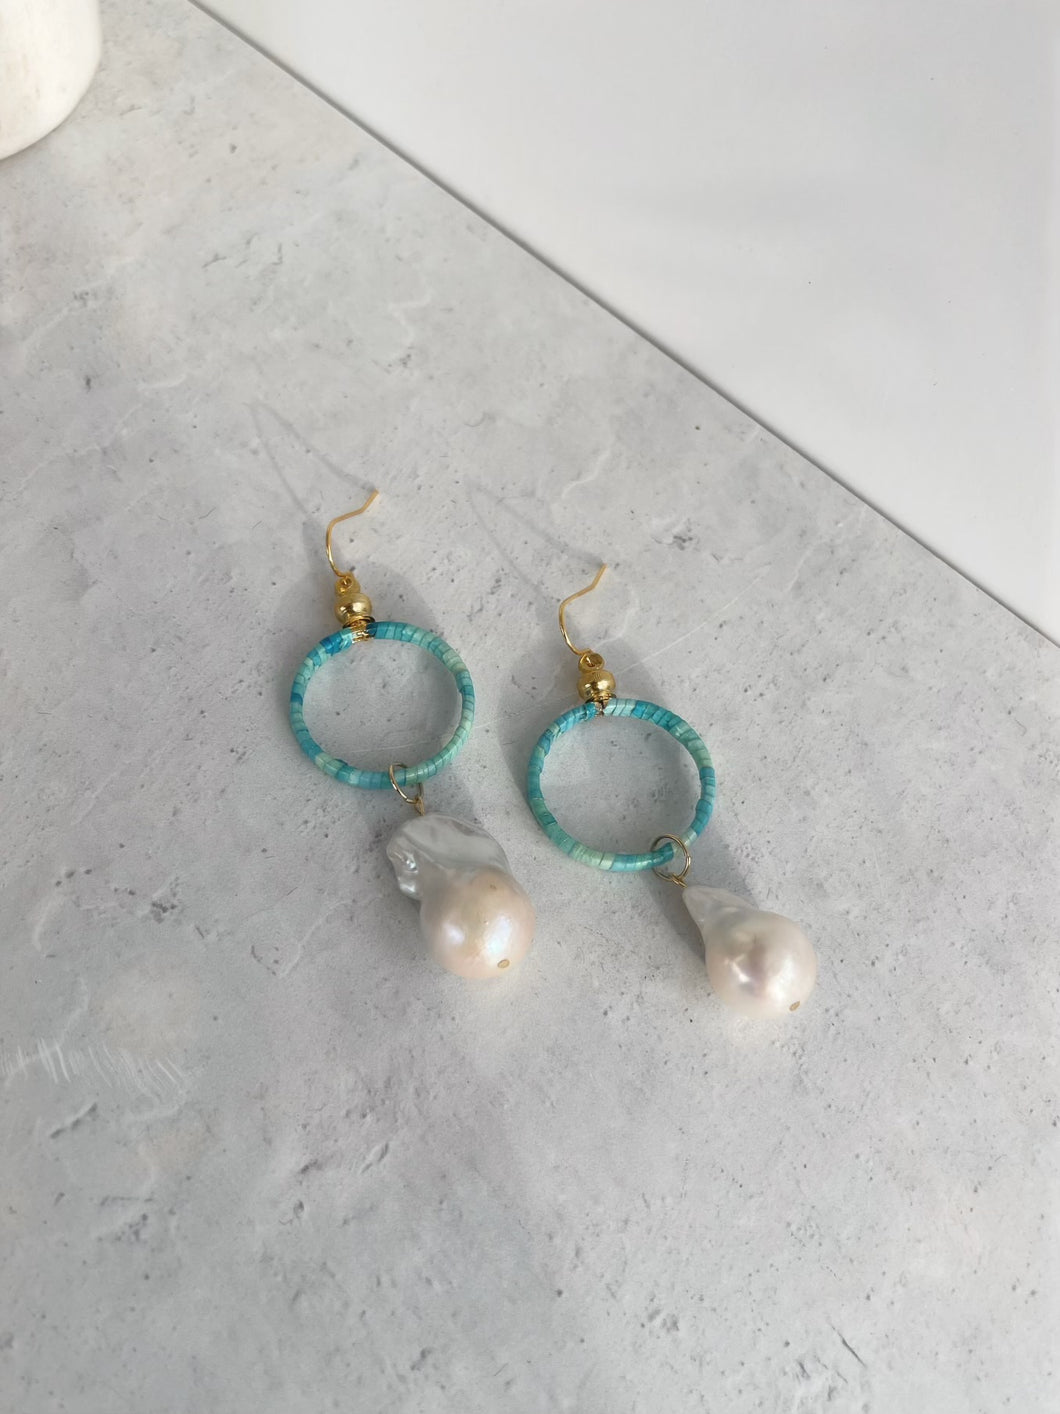 Small turquoise quilled hoops with elk tooth shaped pearls